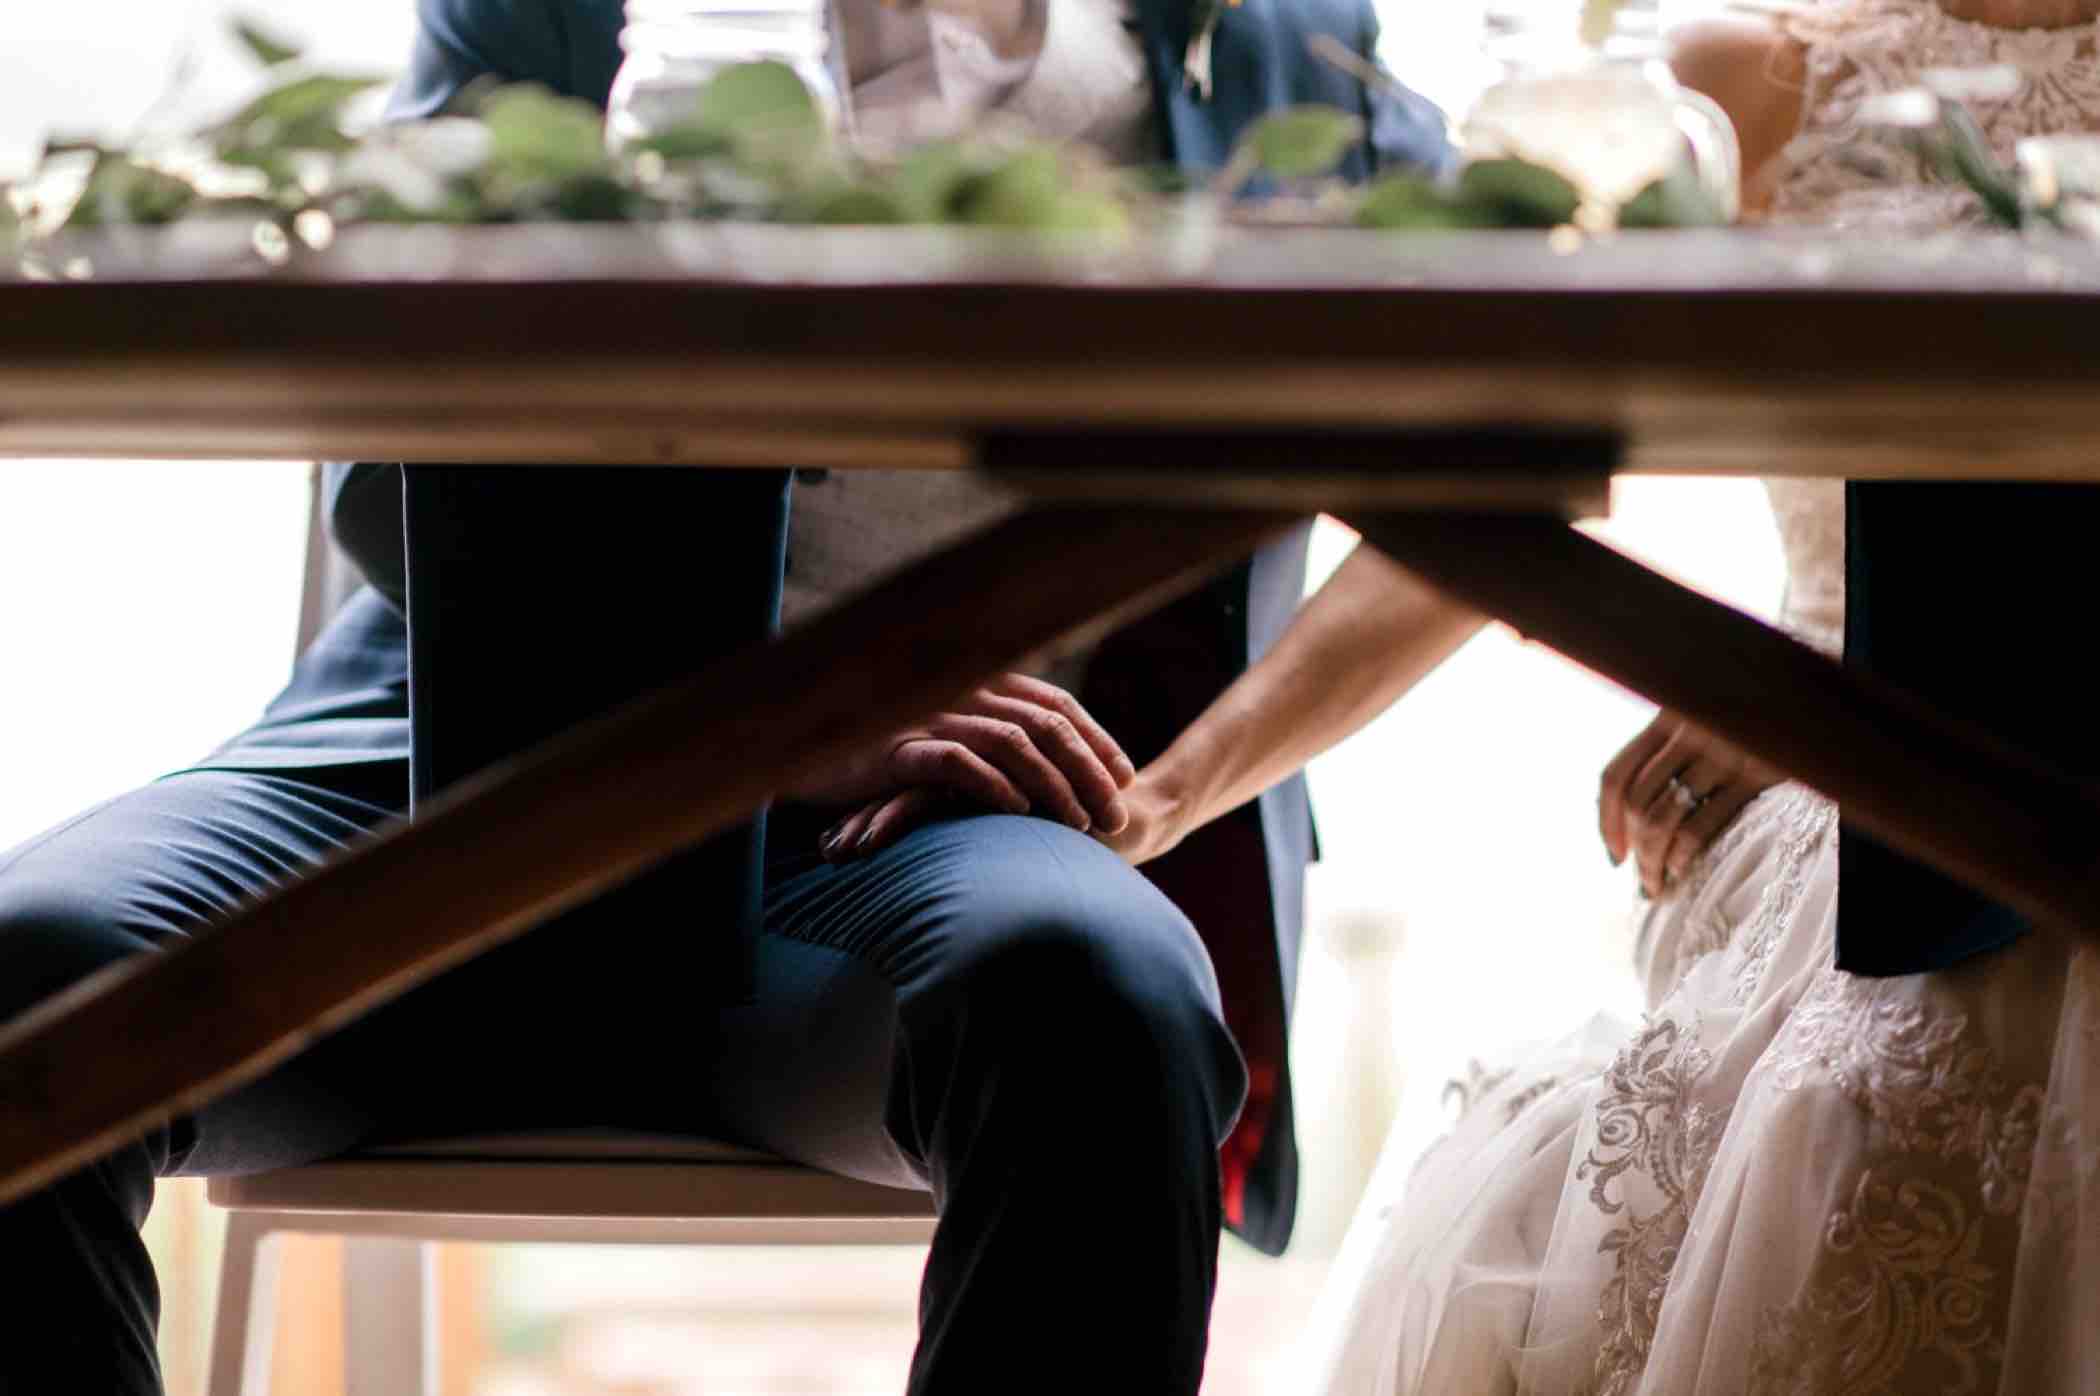 Bride and groom hold hands under the table during an intimate moment at their wedding reception at Piney River Ranch in Vail, Colorado. Photo by Ali and Garrett, Romantic, Adventurous, Nostalgic Wedding Photographers.